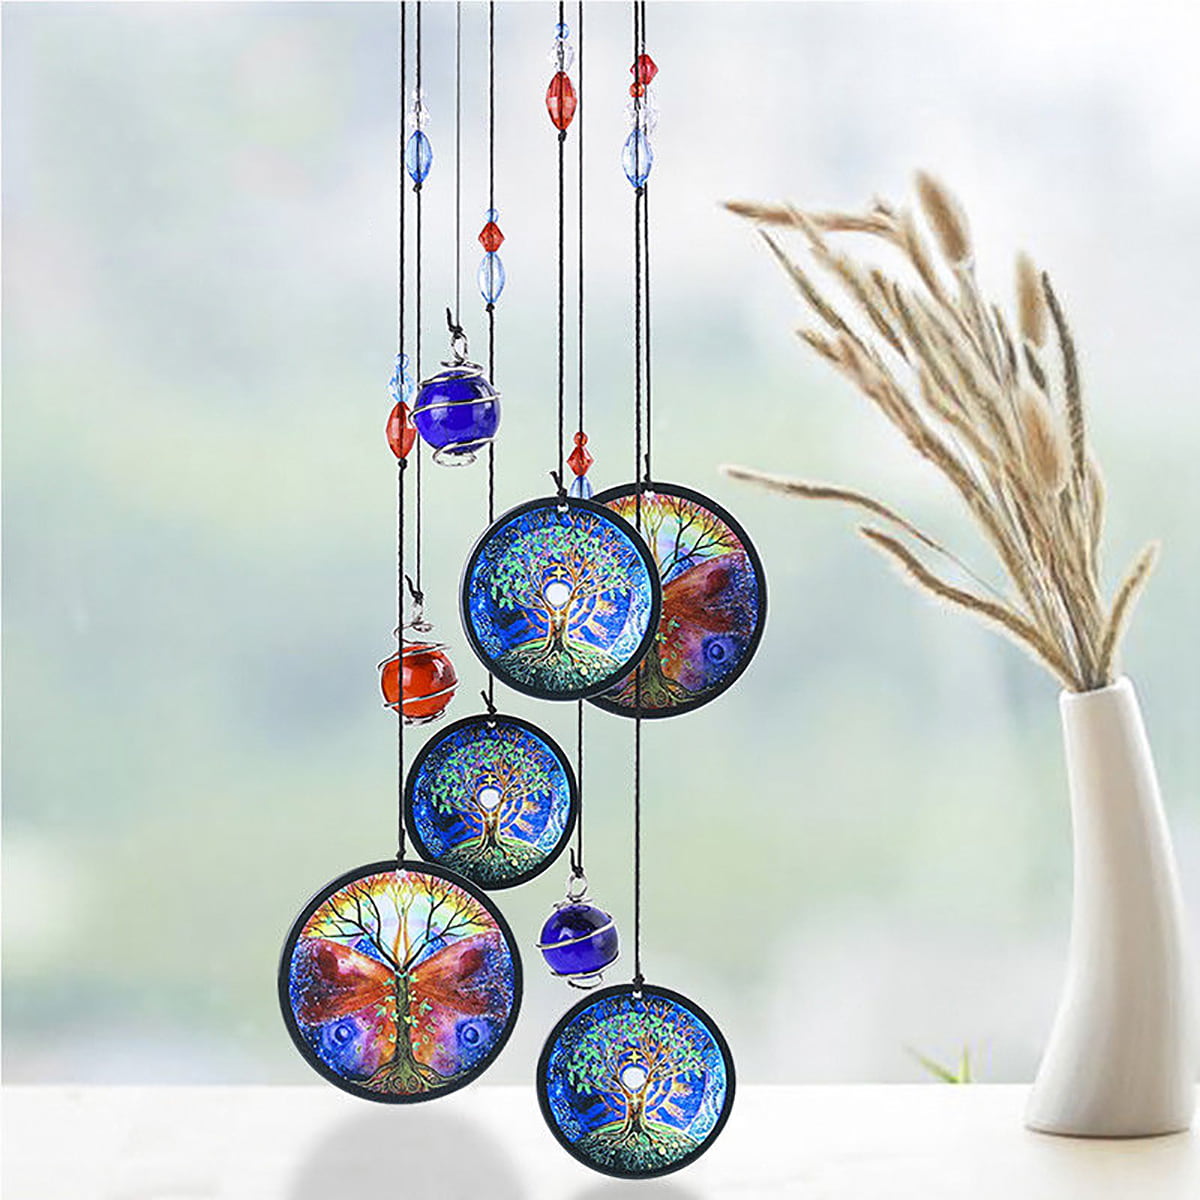 Turquoise Tree of Life Wind Chime